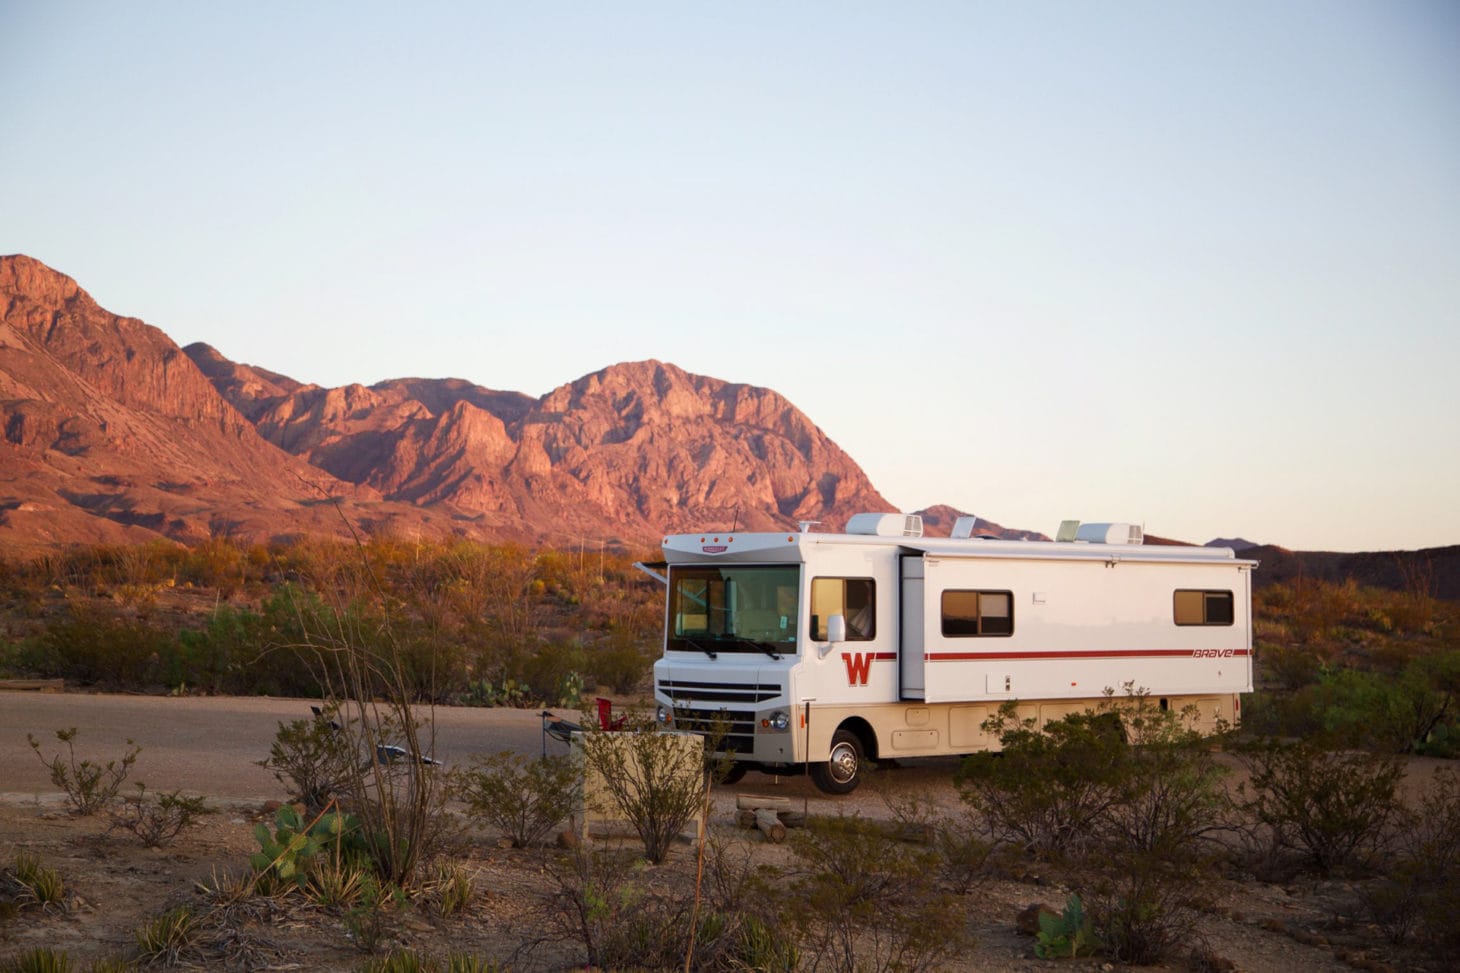 Large RV parked with desert background